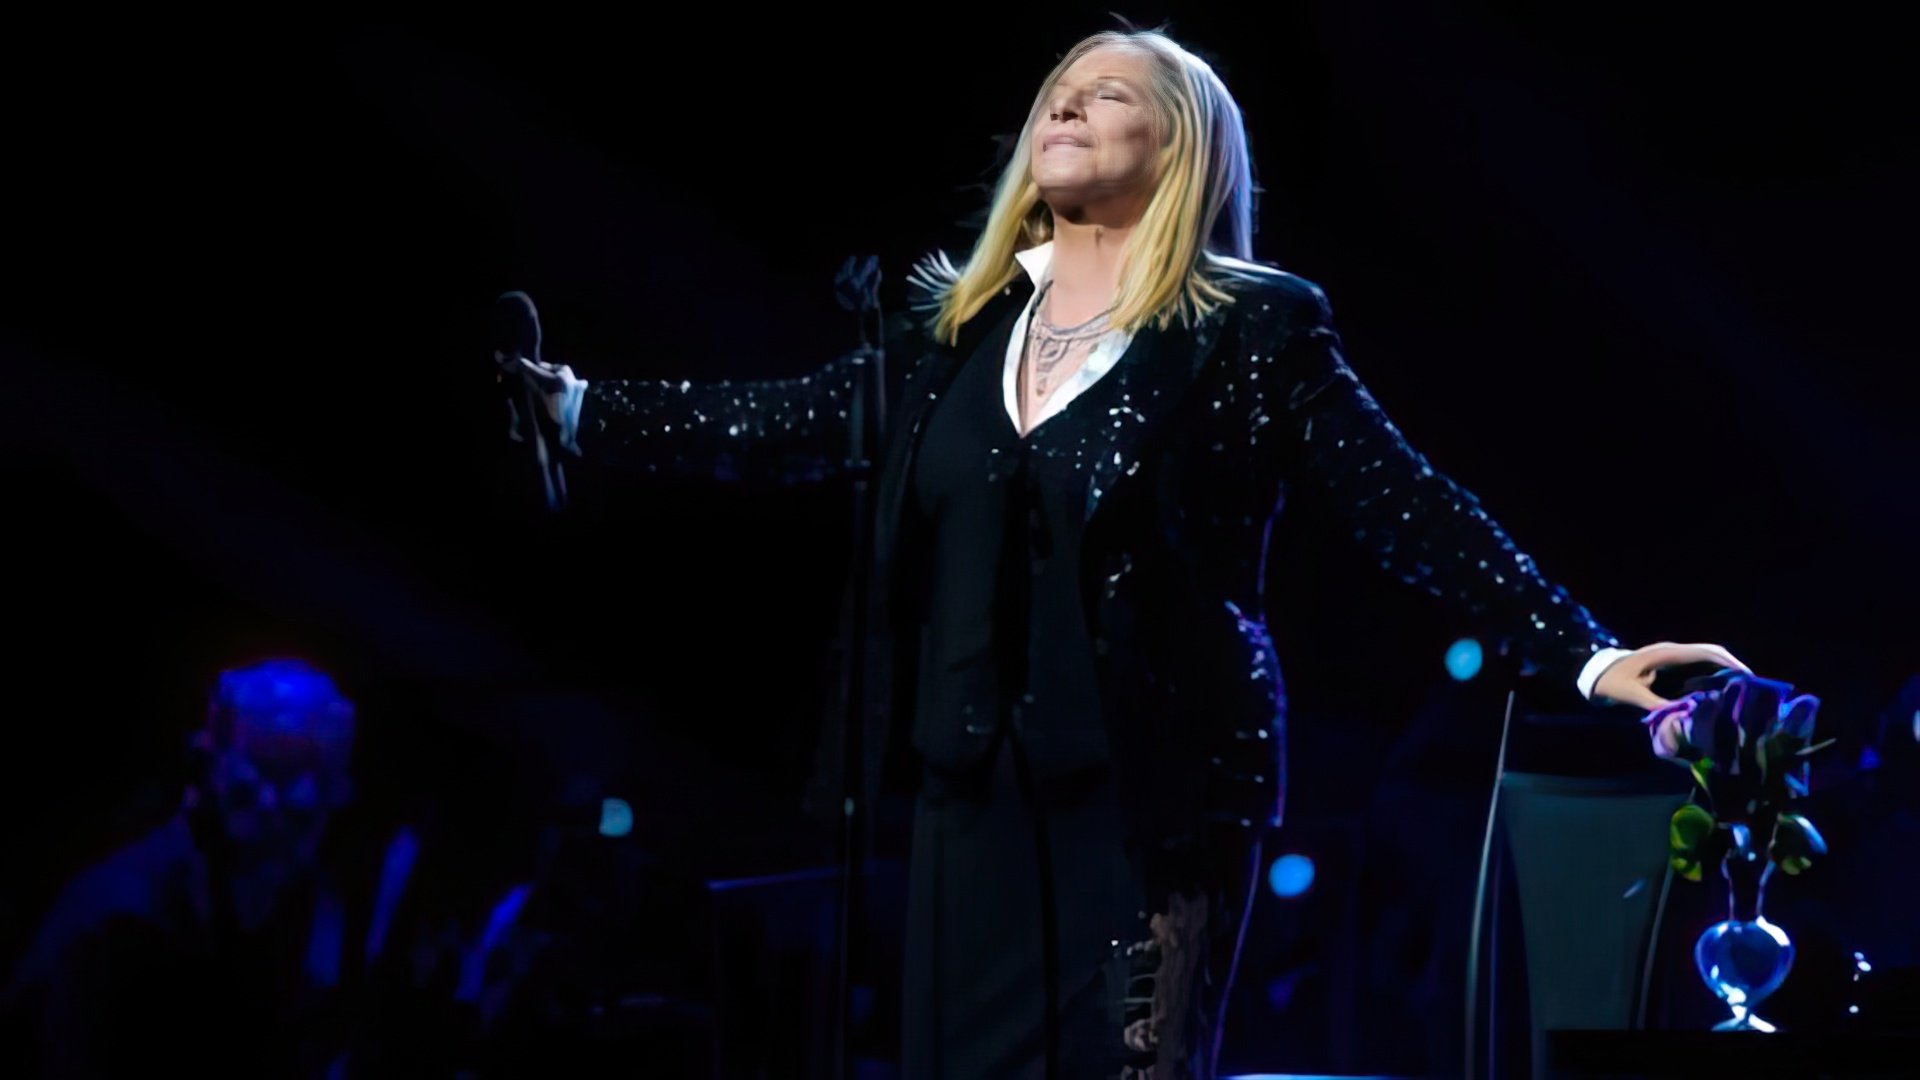 Barbra Streisand’s songs have been popular for over 50 years